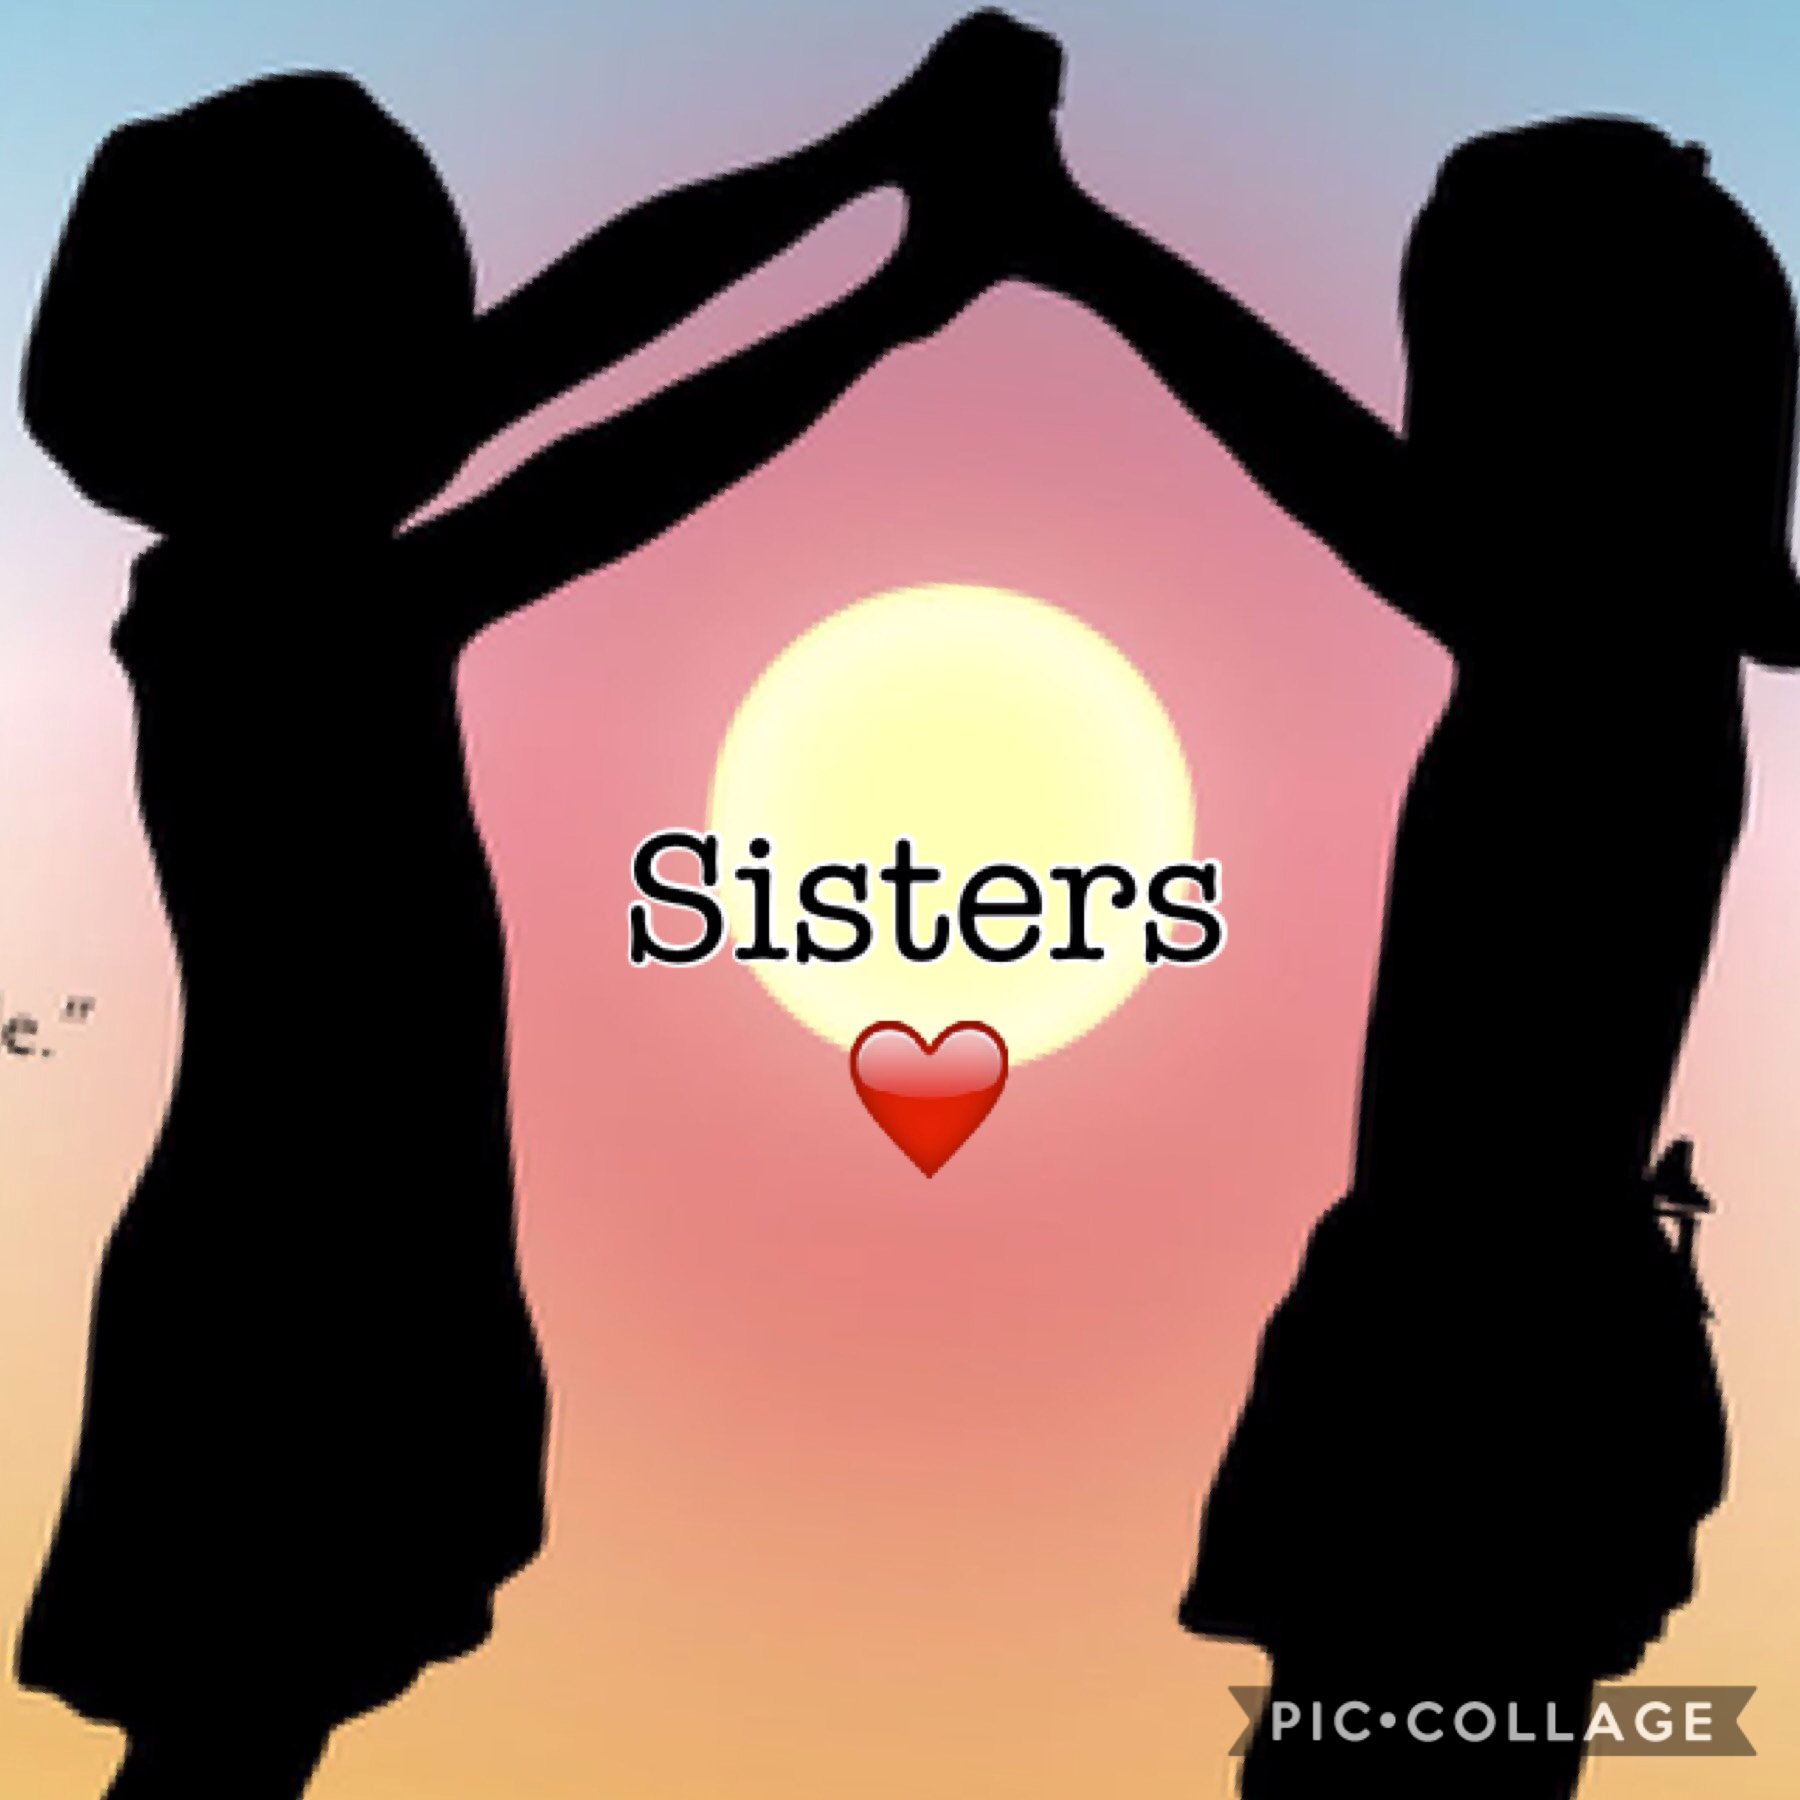 Can't live without a sister😍